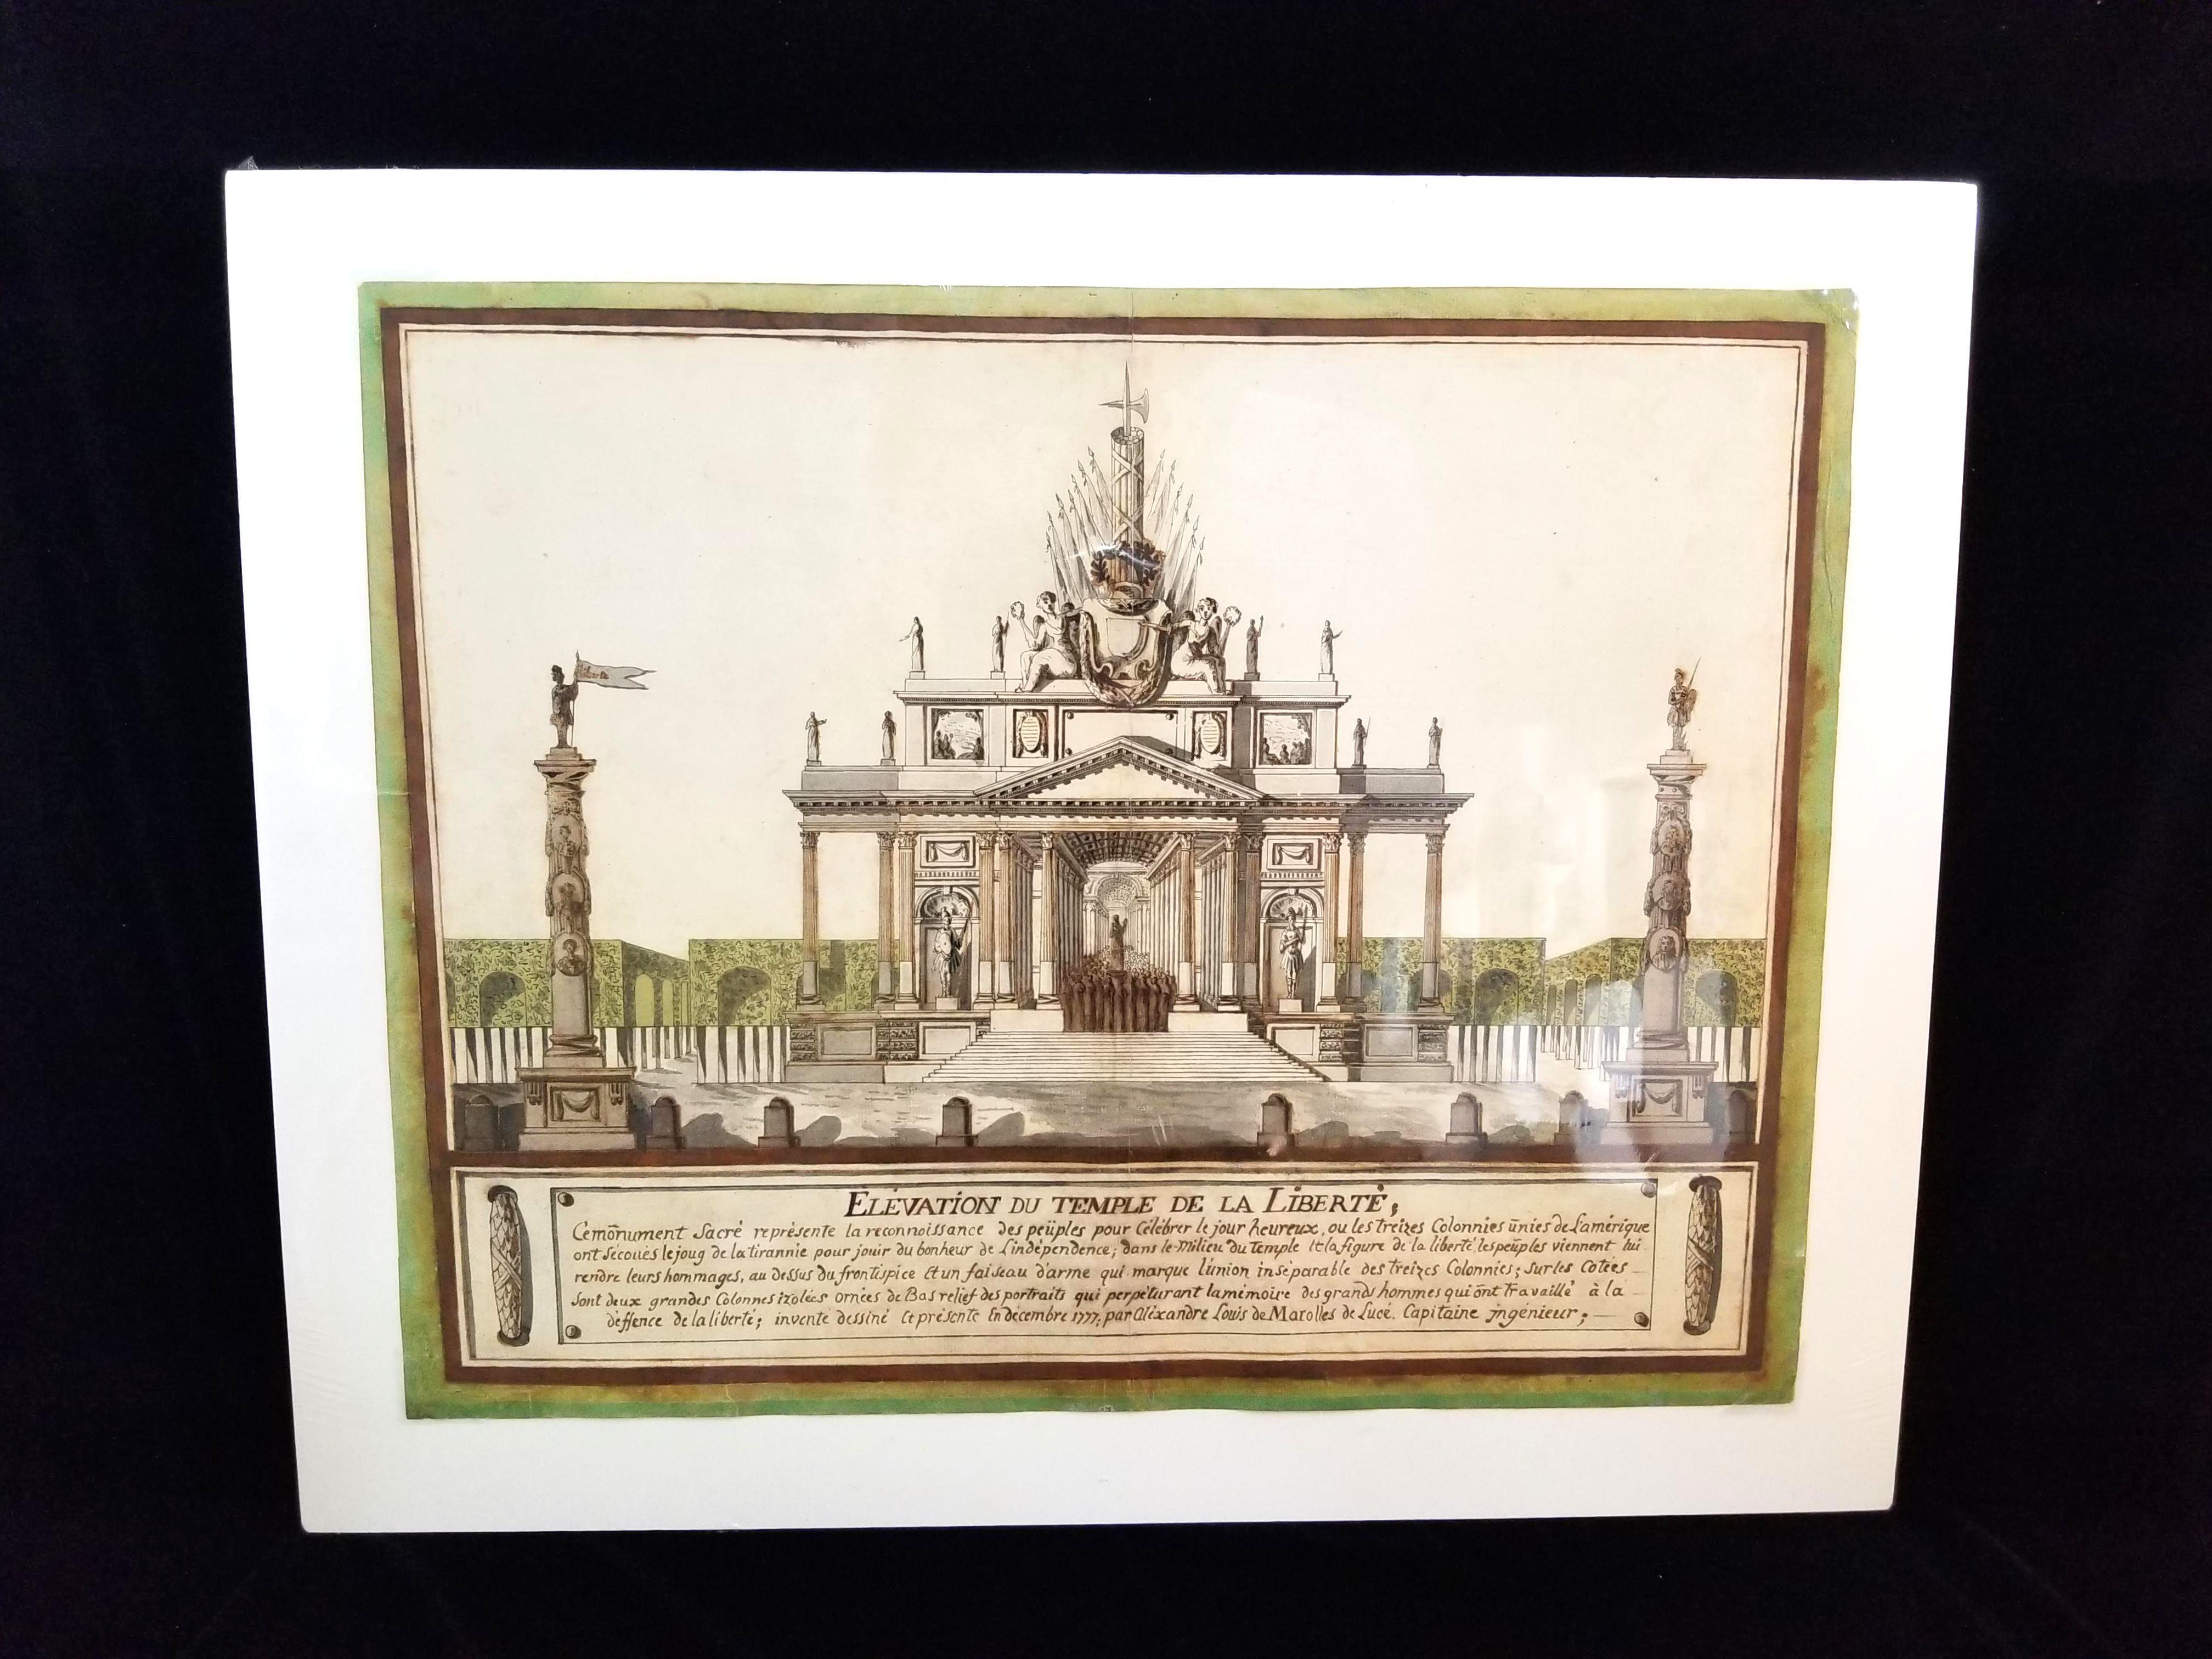 This is a wonderful piece of history. This is an architectural rendering done by Alexandre Louis Chevalier de Marolles de Lucé (Knight of Marolles de Luce) for the proposed “Heroes of the Revolution” monument in 1777. Alexandre Louis, who was